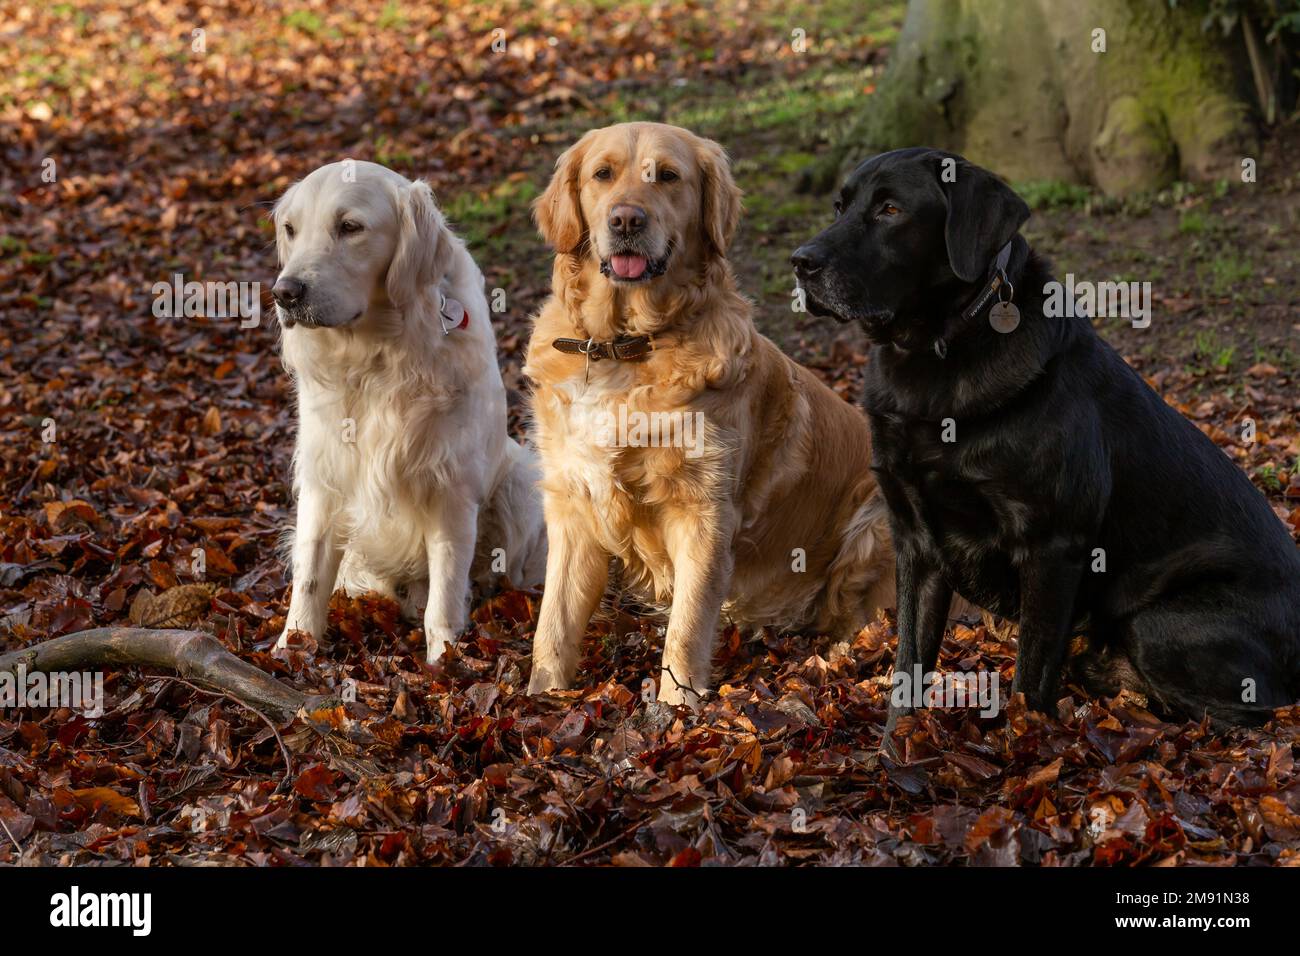 Two Golden Retrievers (one pale, one golden) sitting with a Black Labrador Retriever. They are surrounded by autumn leaf fall. Stock Photo